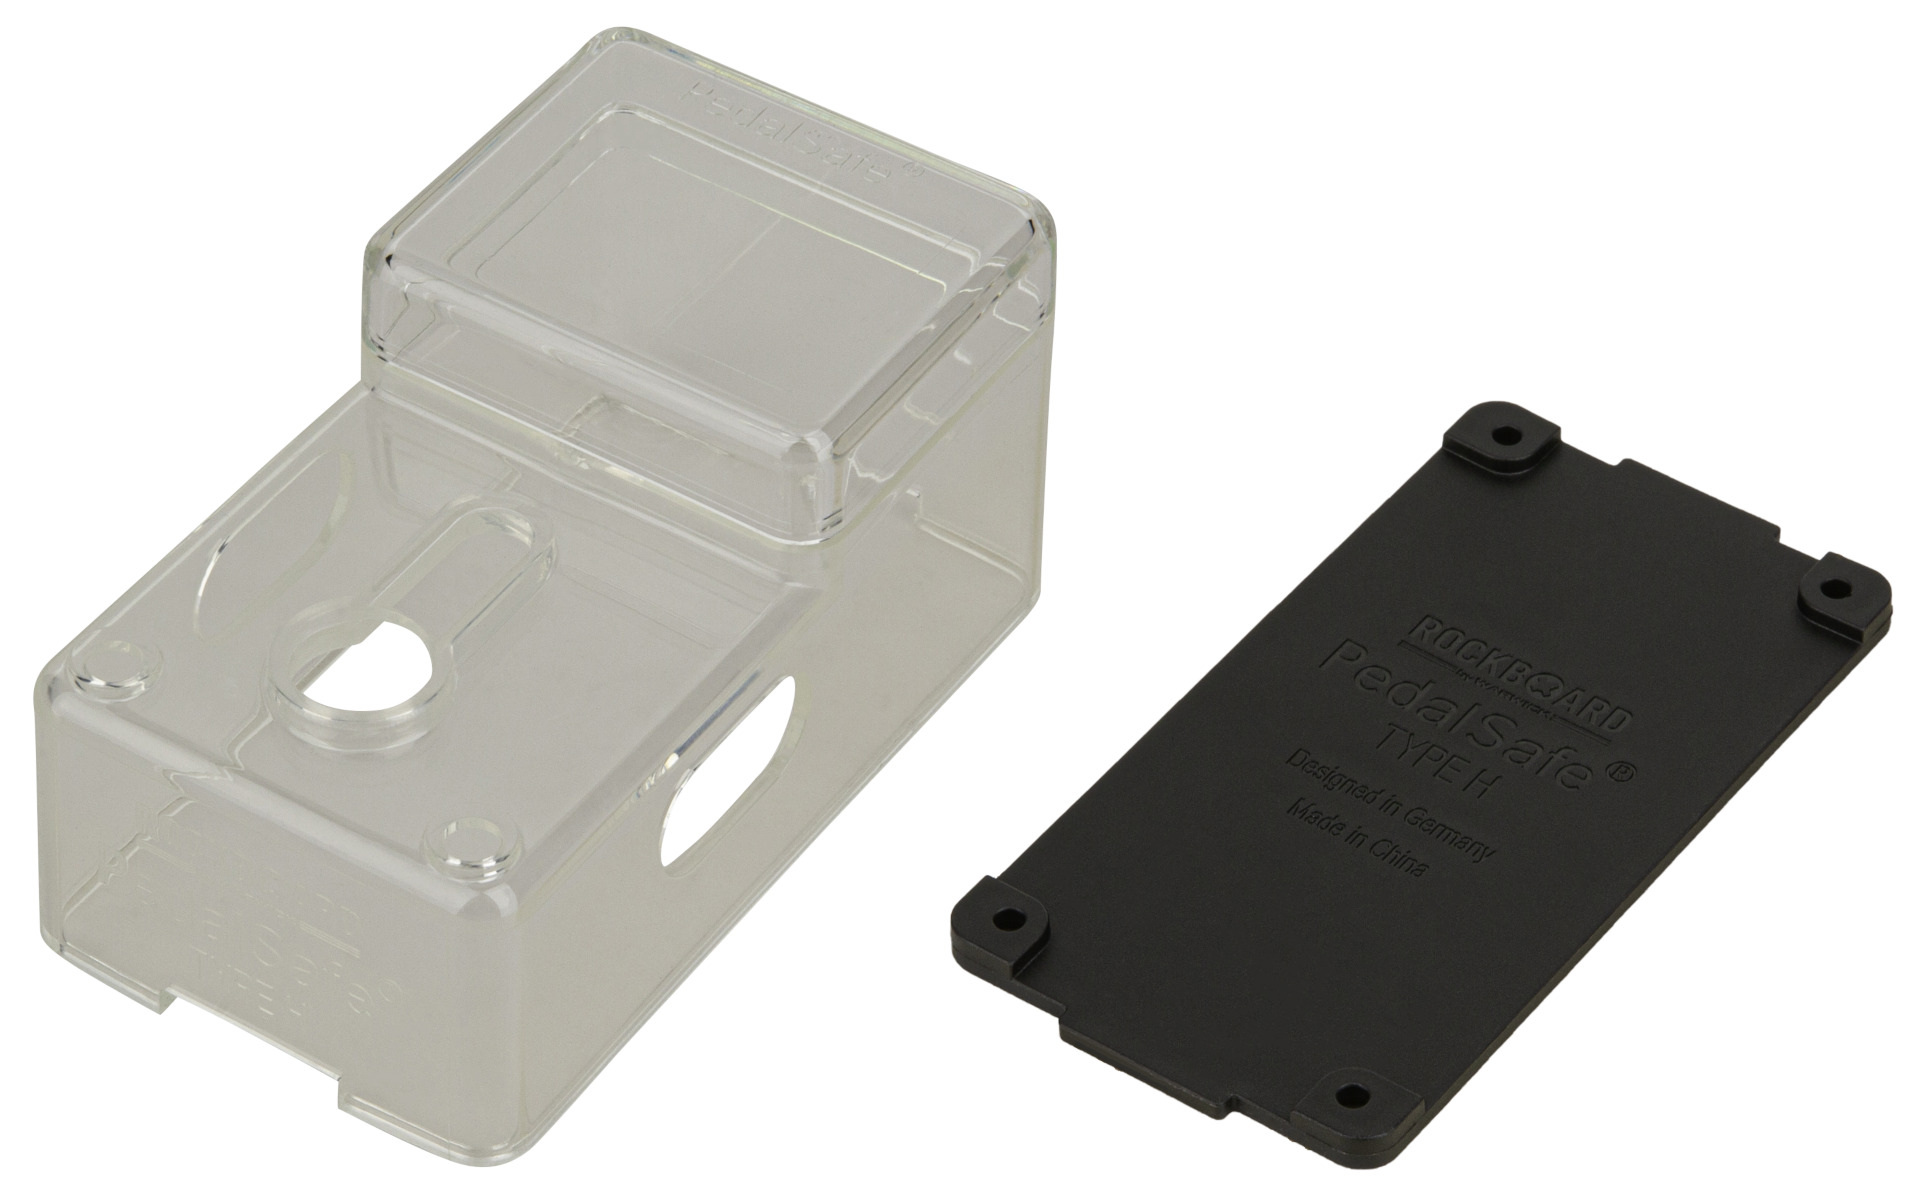 RockBoard PedalSafe Type H - Protective Cover And Universal Mounting Plate For Digitech Compact Pedals